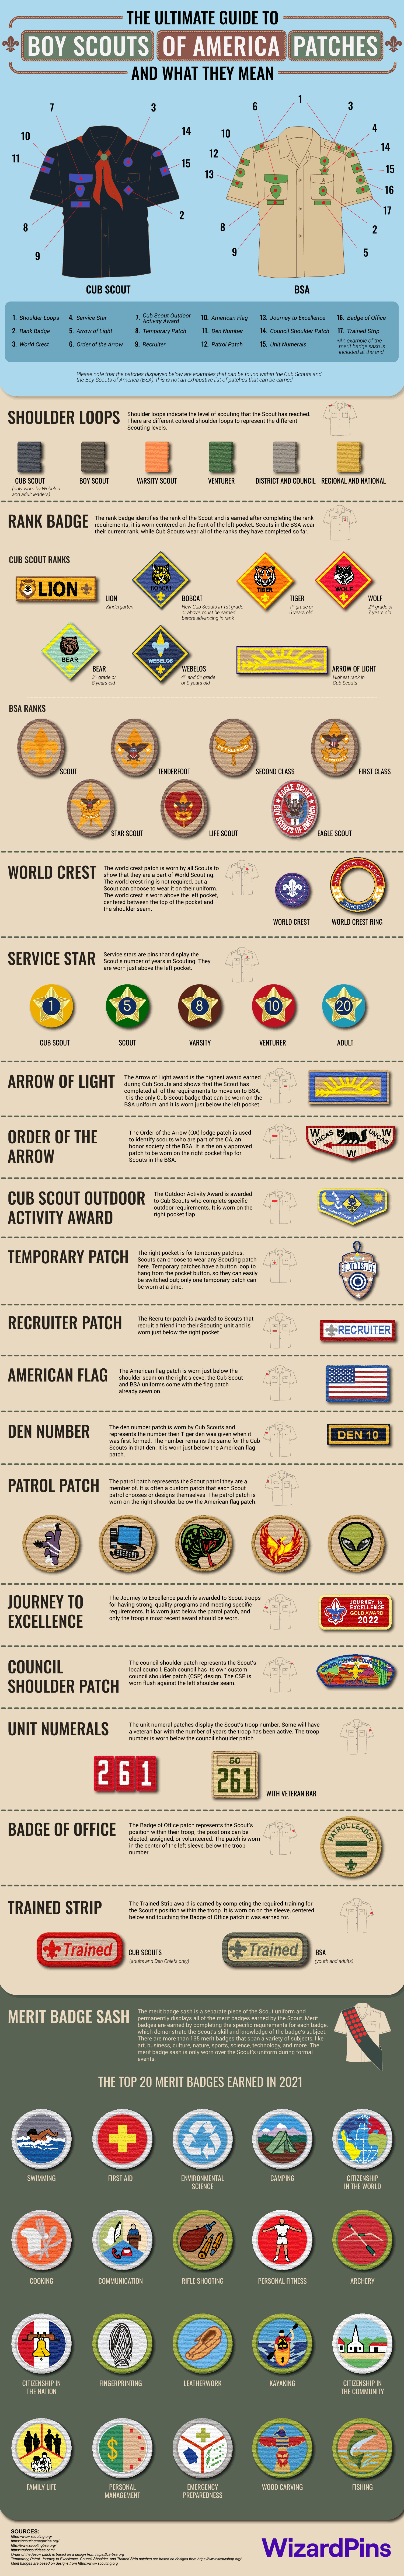 Ultimate Guide to Boy Scouts Patches and What They Mean